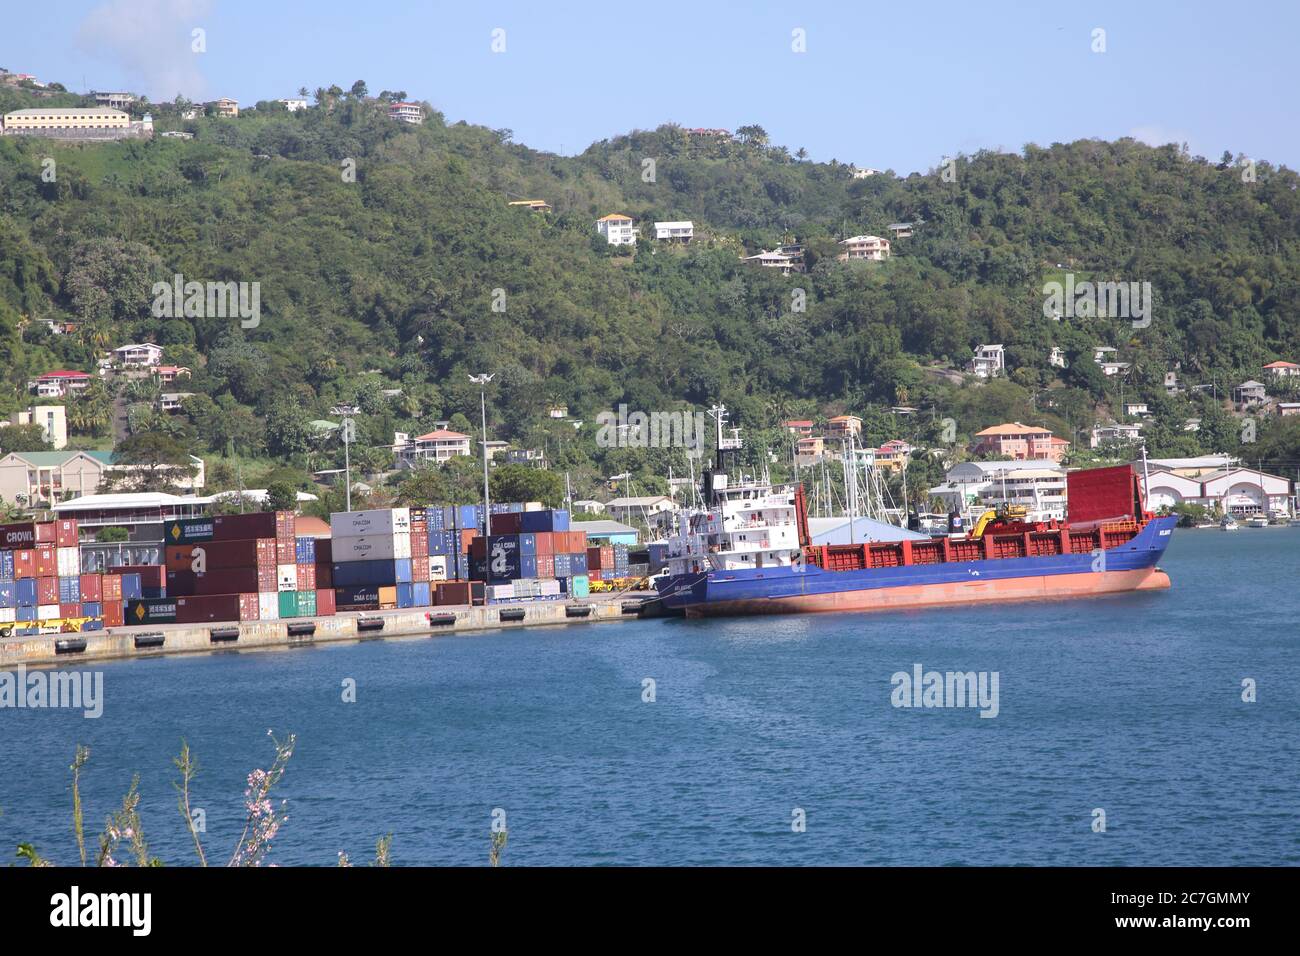 St George's Grenada Carenage Harbour Container Ship Bastre Atlantic et containers in Port Banque D'Images